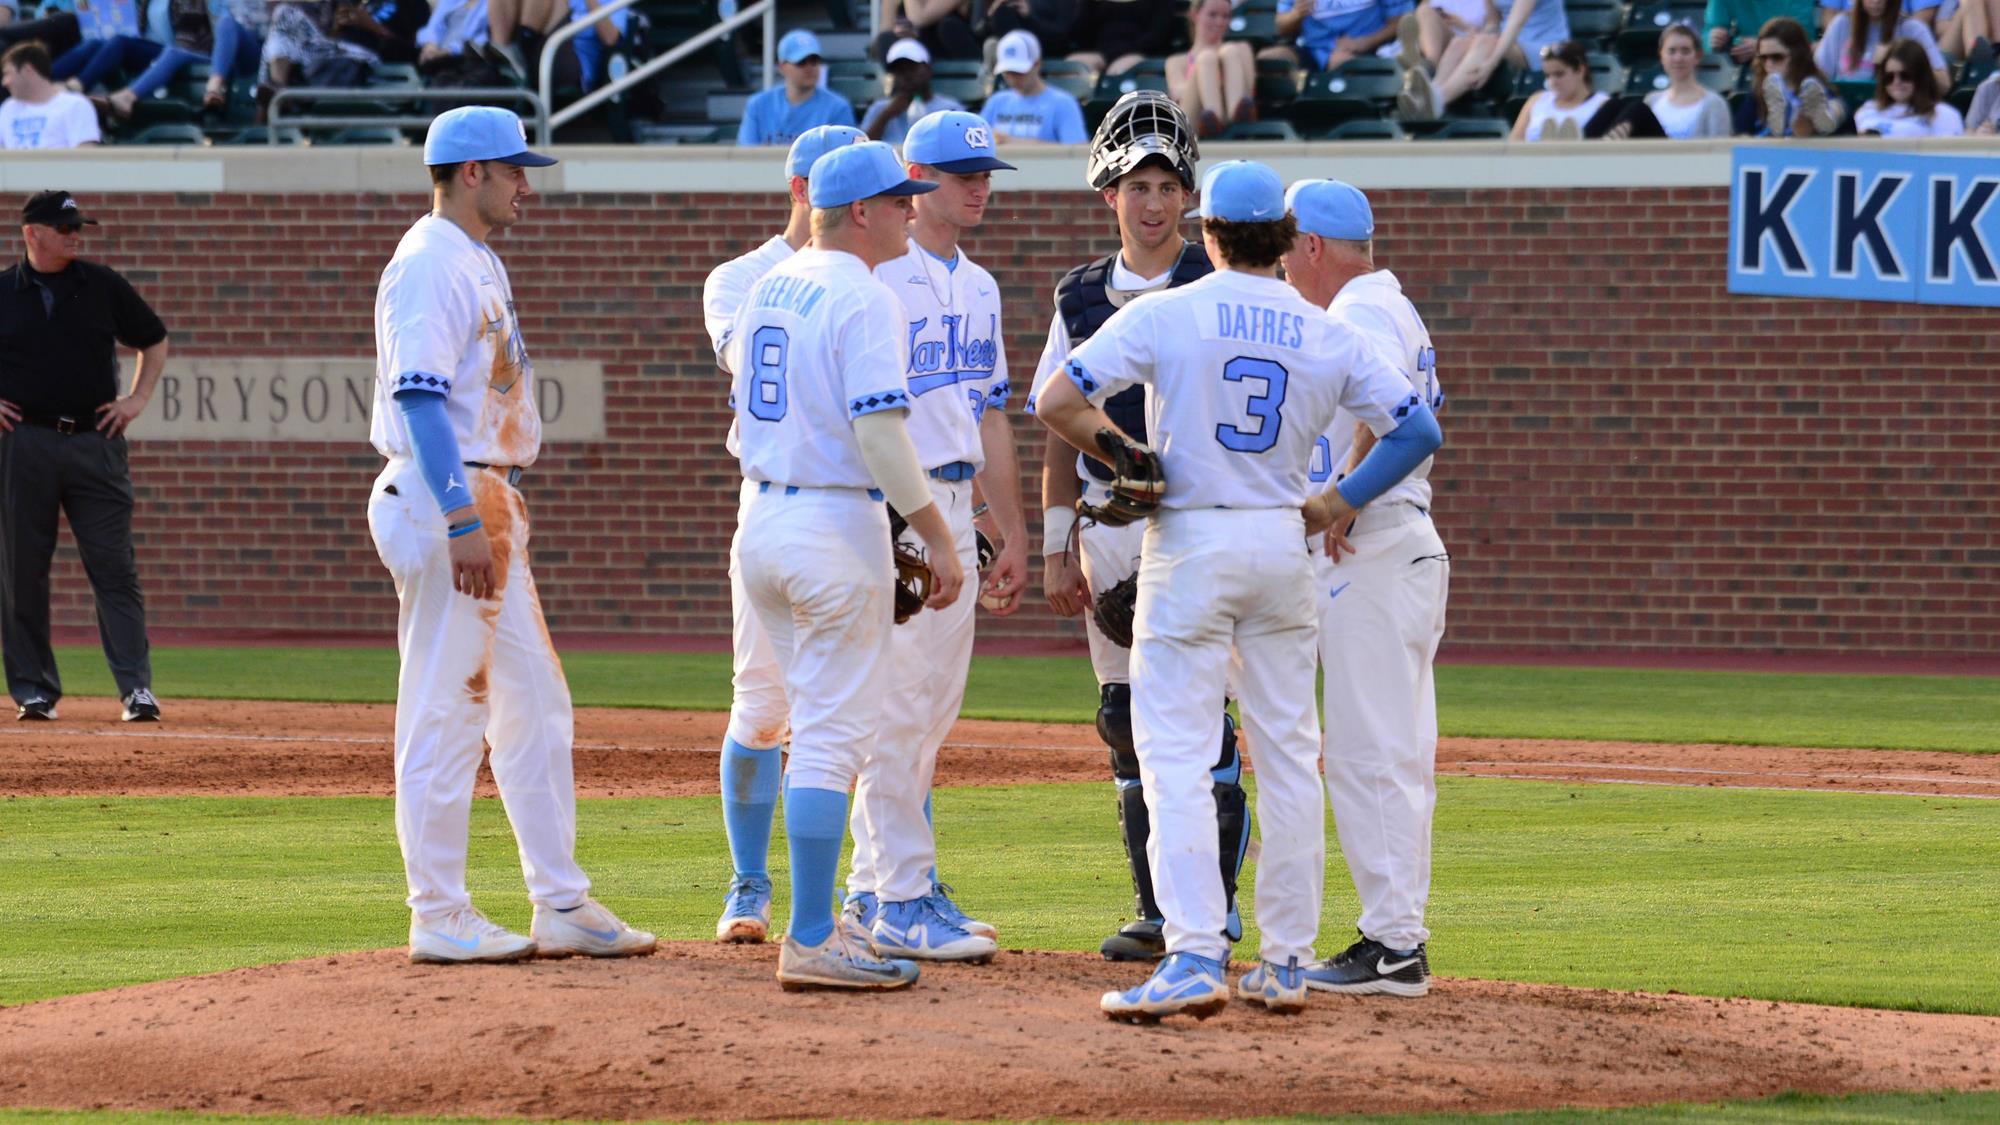 ECU Holds UNC Baseball to Just Two Hits, Takes Series Opener 21